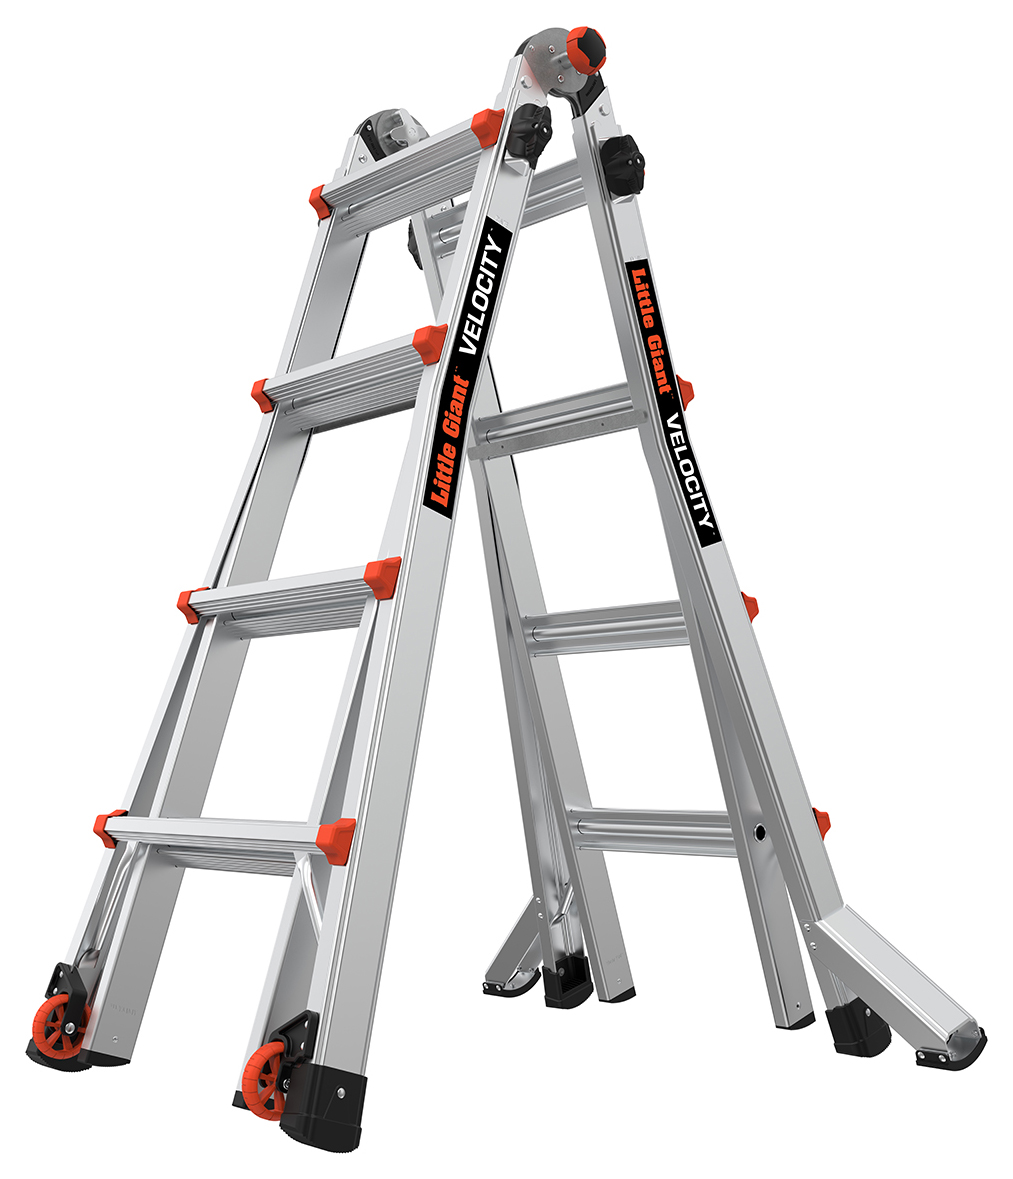 Image of Little Giant 4 Rung Velocity Series 2.0 Multi-Purpose Ladder